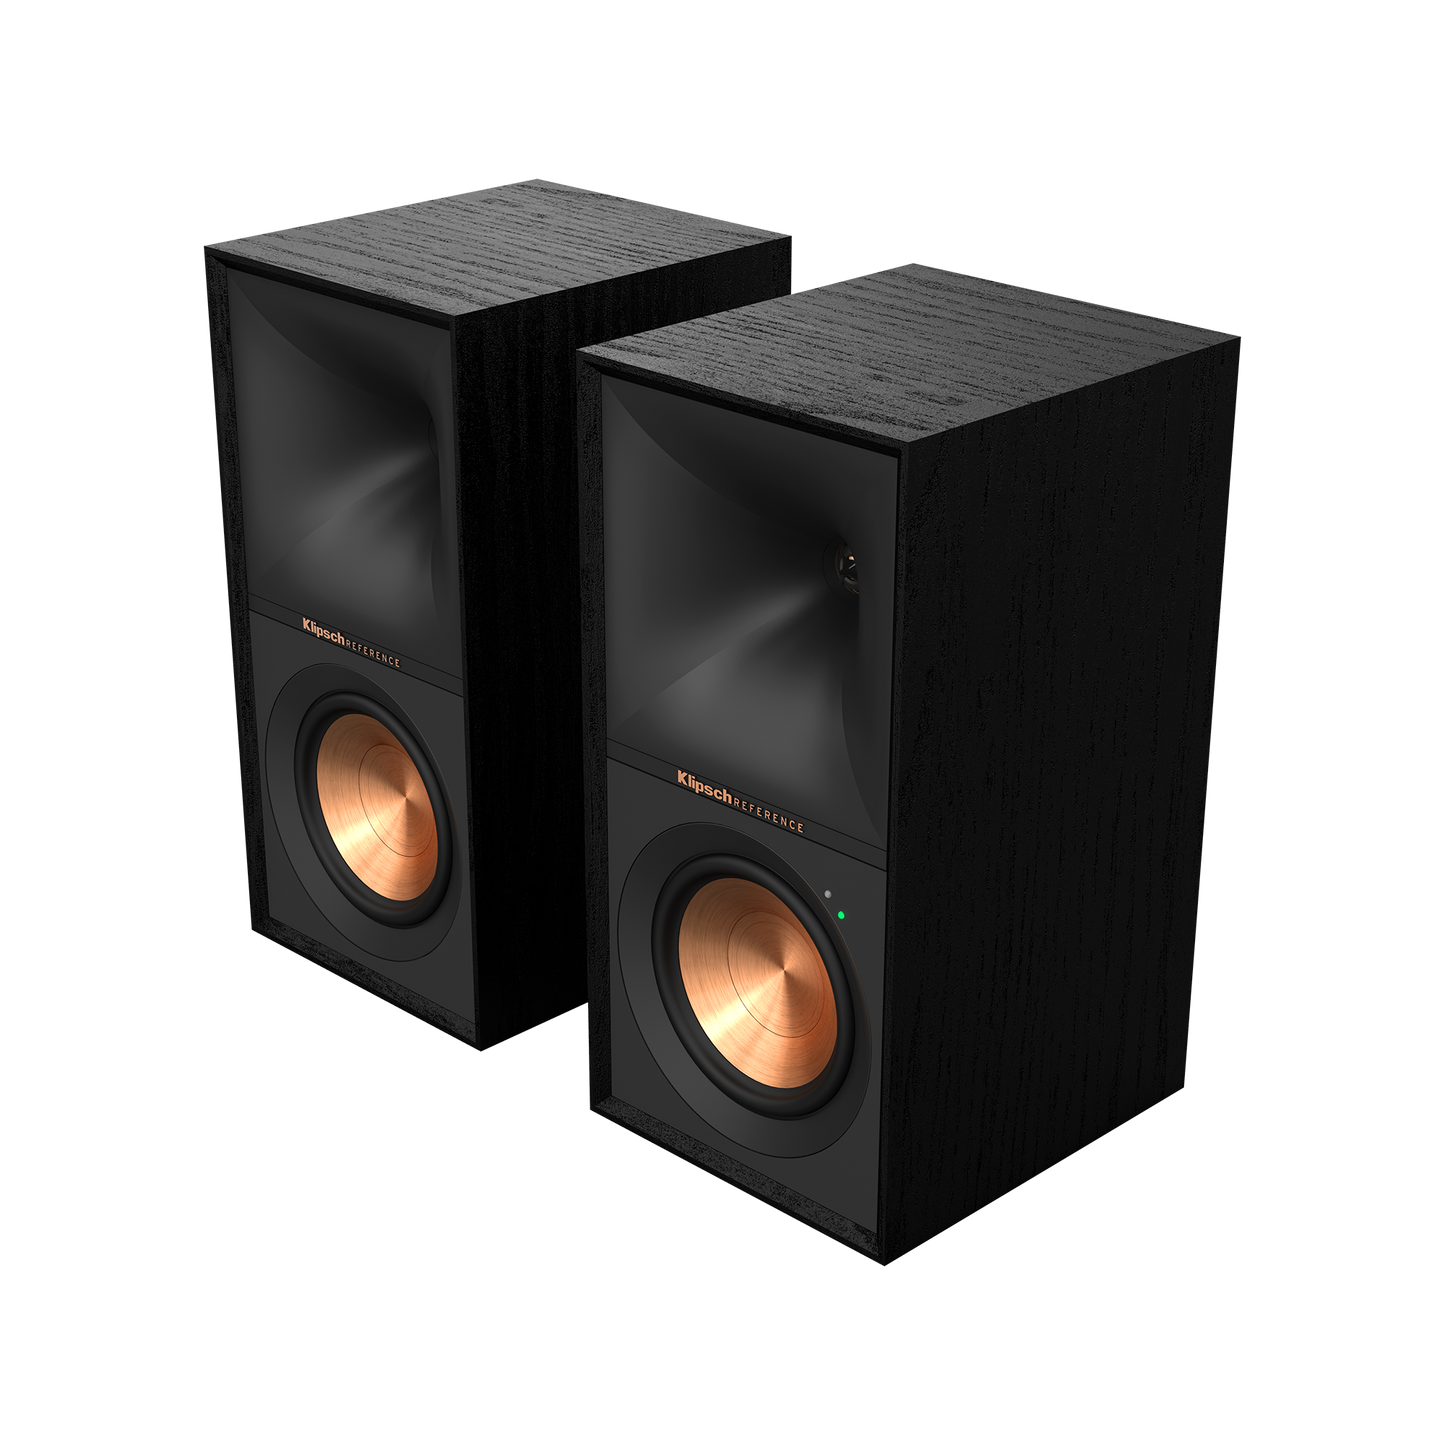 Klipsch R-50PM Powered Speakers with 5.25" Woofers. Black no grille